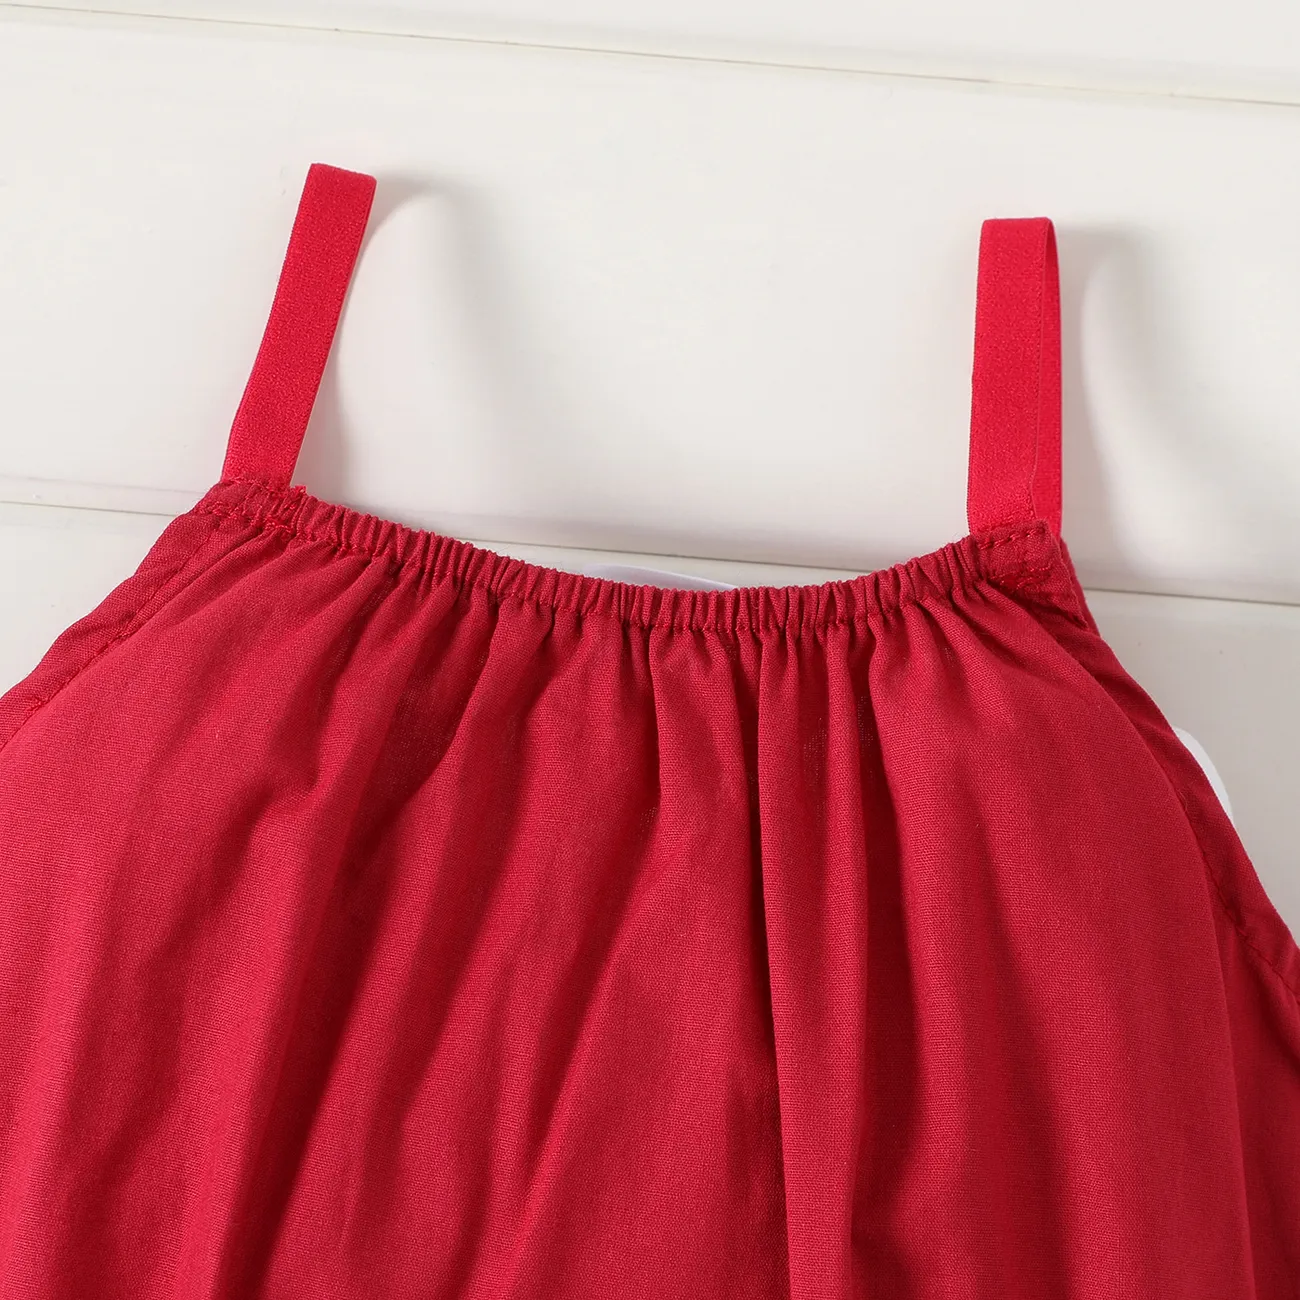 100% Cotton Baby Girl Loose-fit Solid Sleeveless Spaghetti Strap Harem Pants Overalls Burgundy big image 1